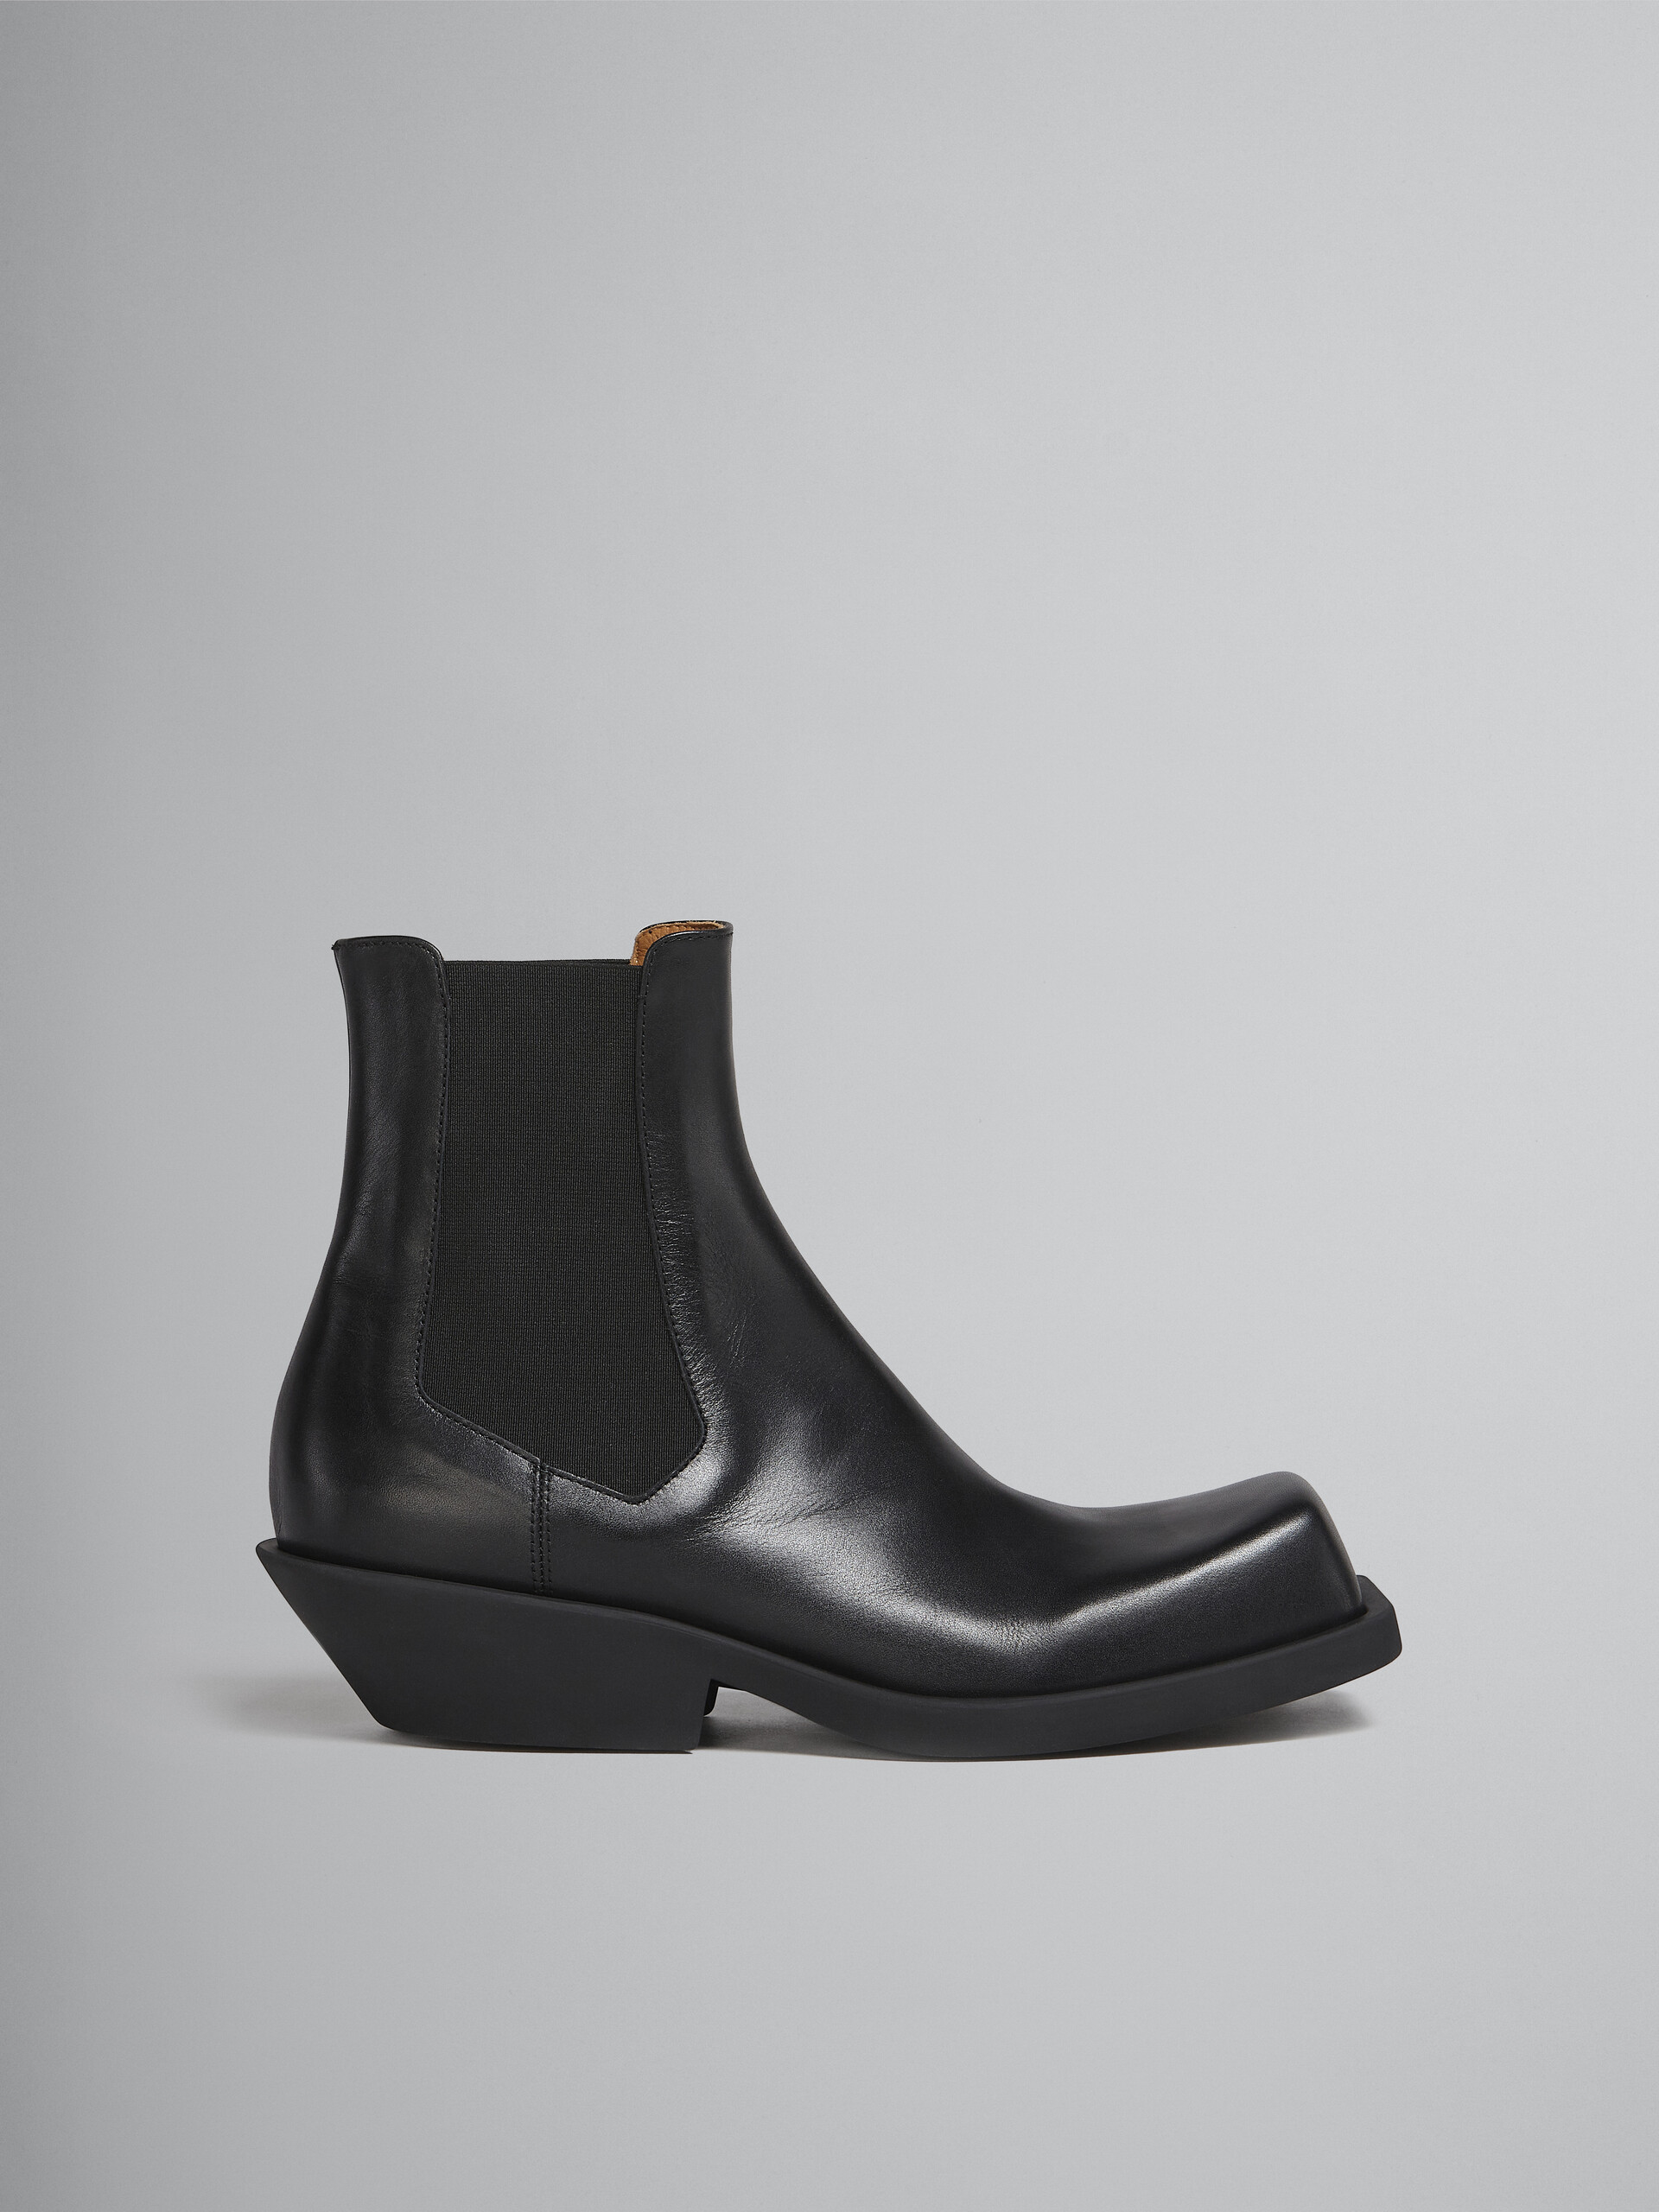 Black leather Chelsea boot - Boots - Image 1